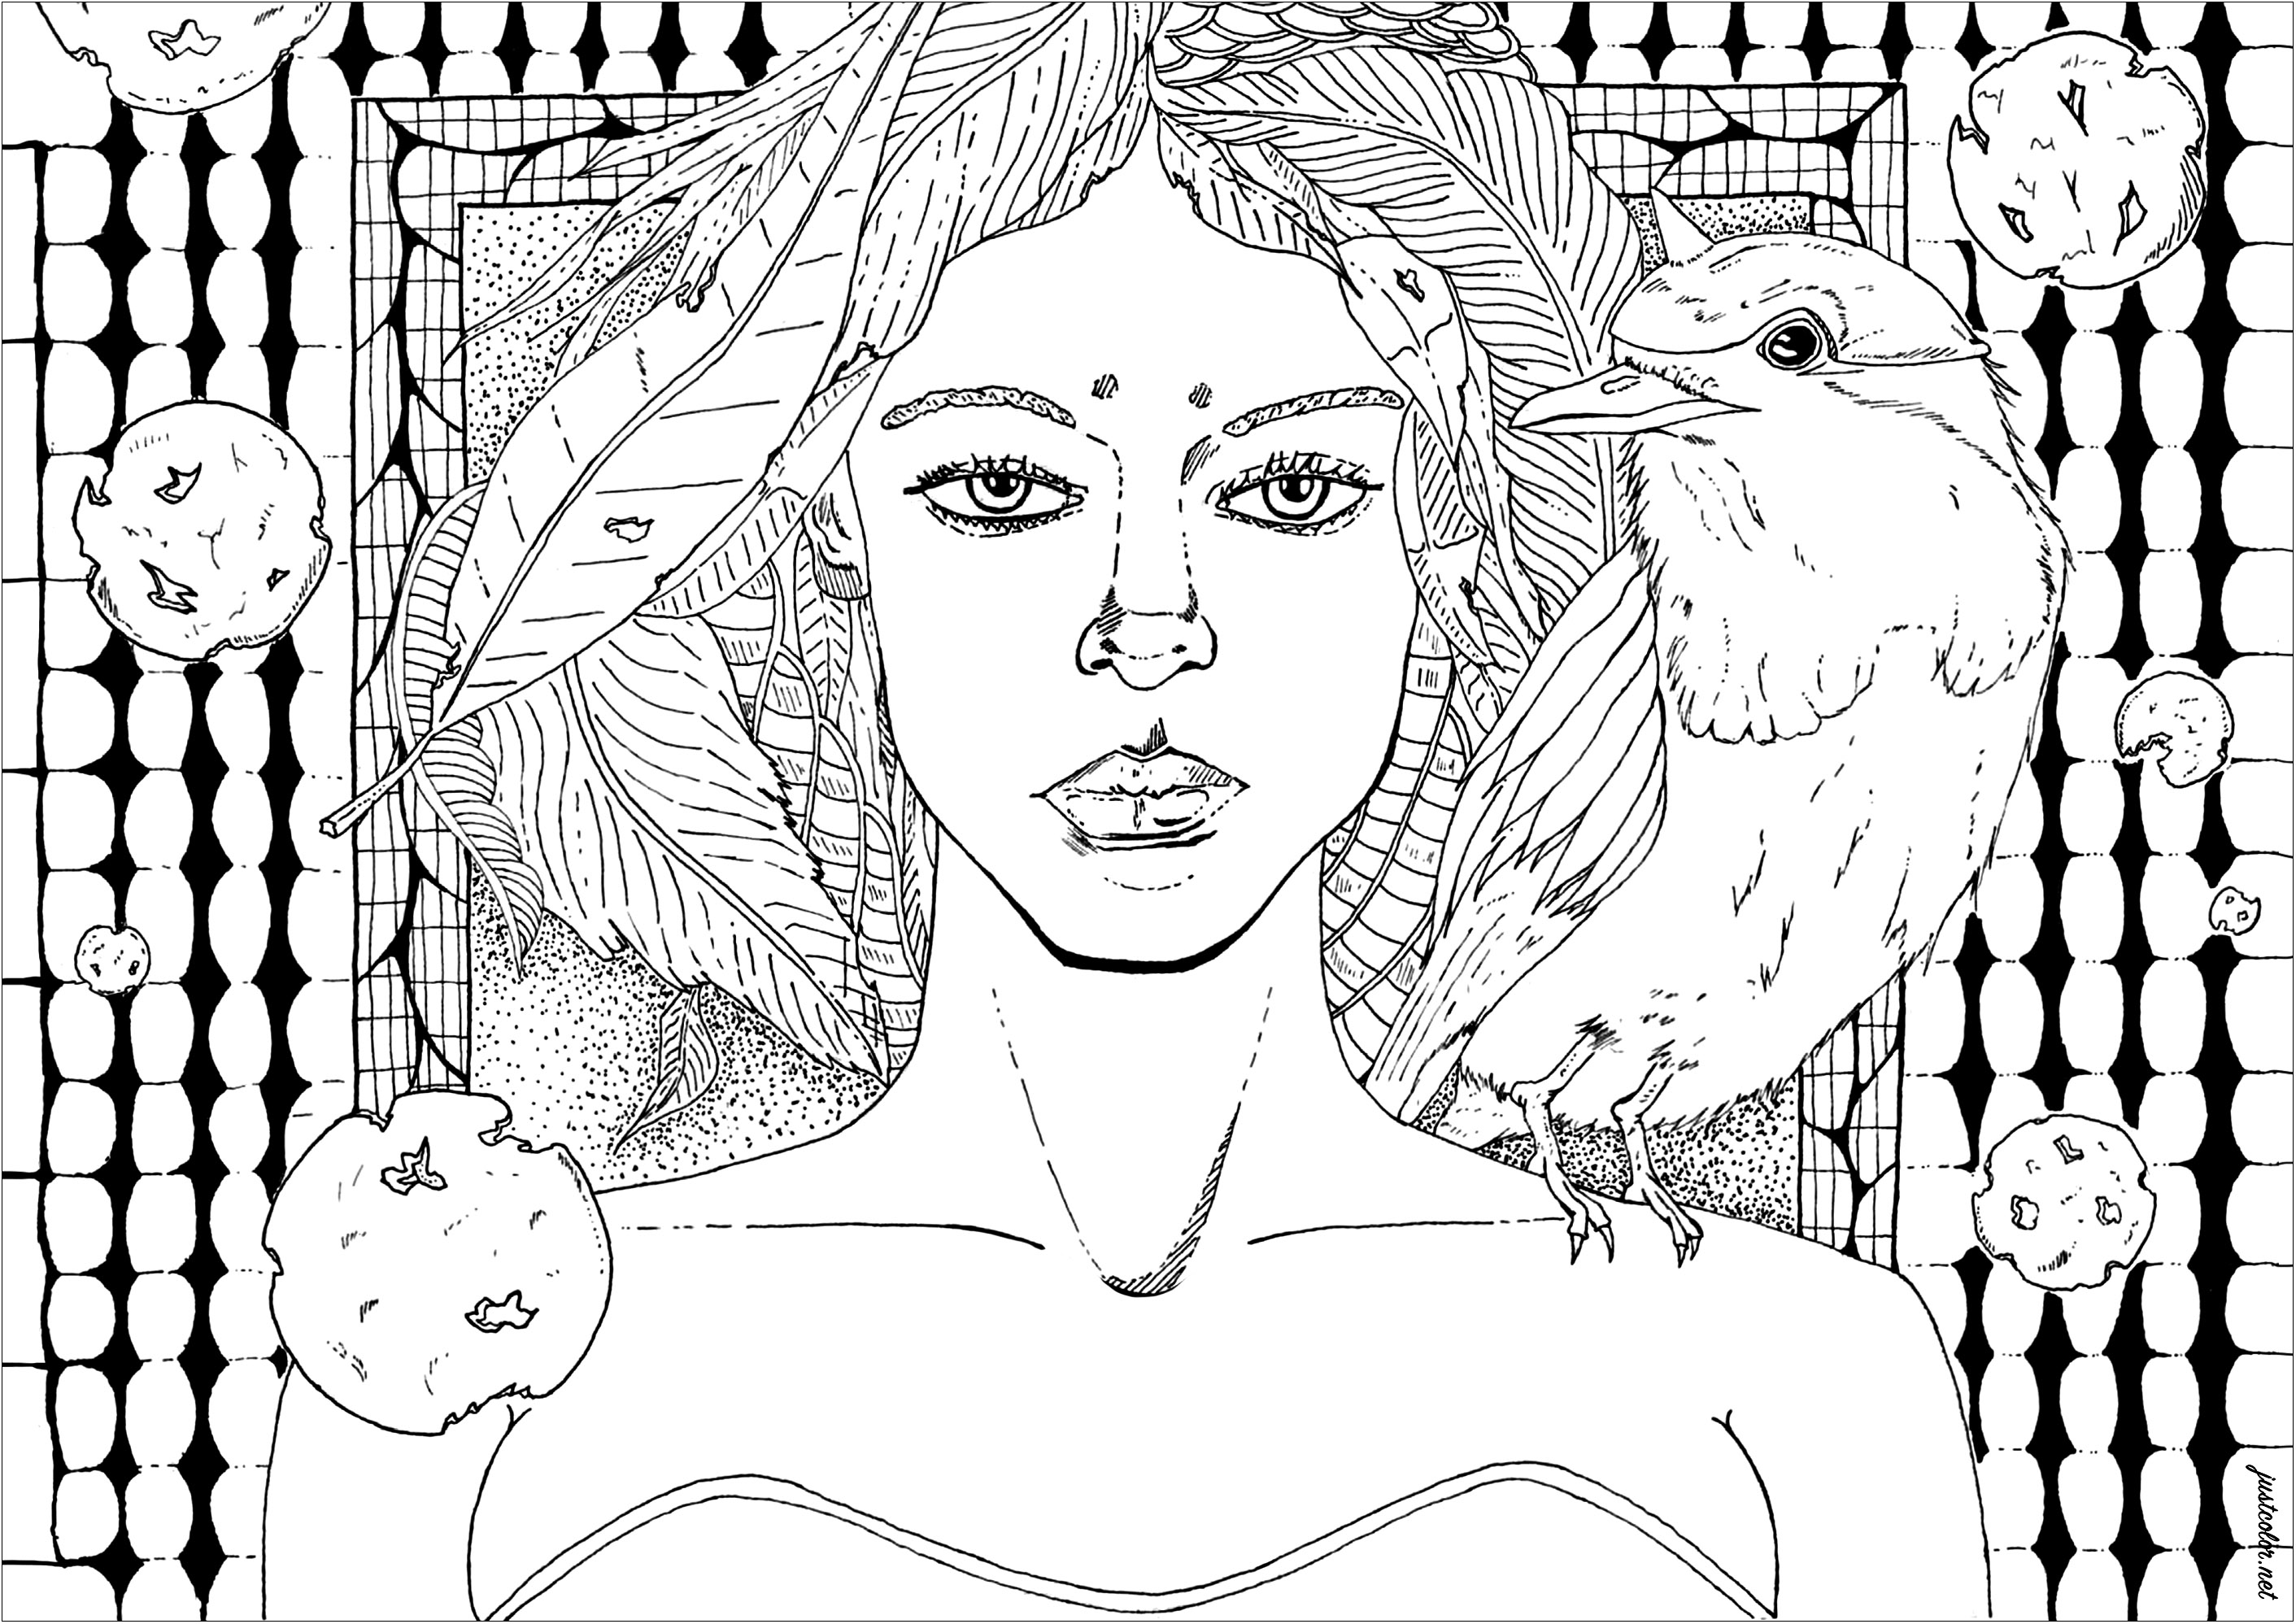 Deep-eyed woman, wearing a crown of leaves, with a raven on her shoulder. This elegant woman holds a raven on her shoulder and looks at you with an expression of calm and serenity. The woman and raven are in harmony, and their presence gives a feeling of peace and tranquility. Many coloring leaves in the figure's hair and in the background.